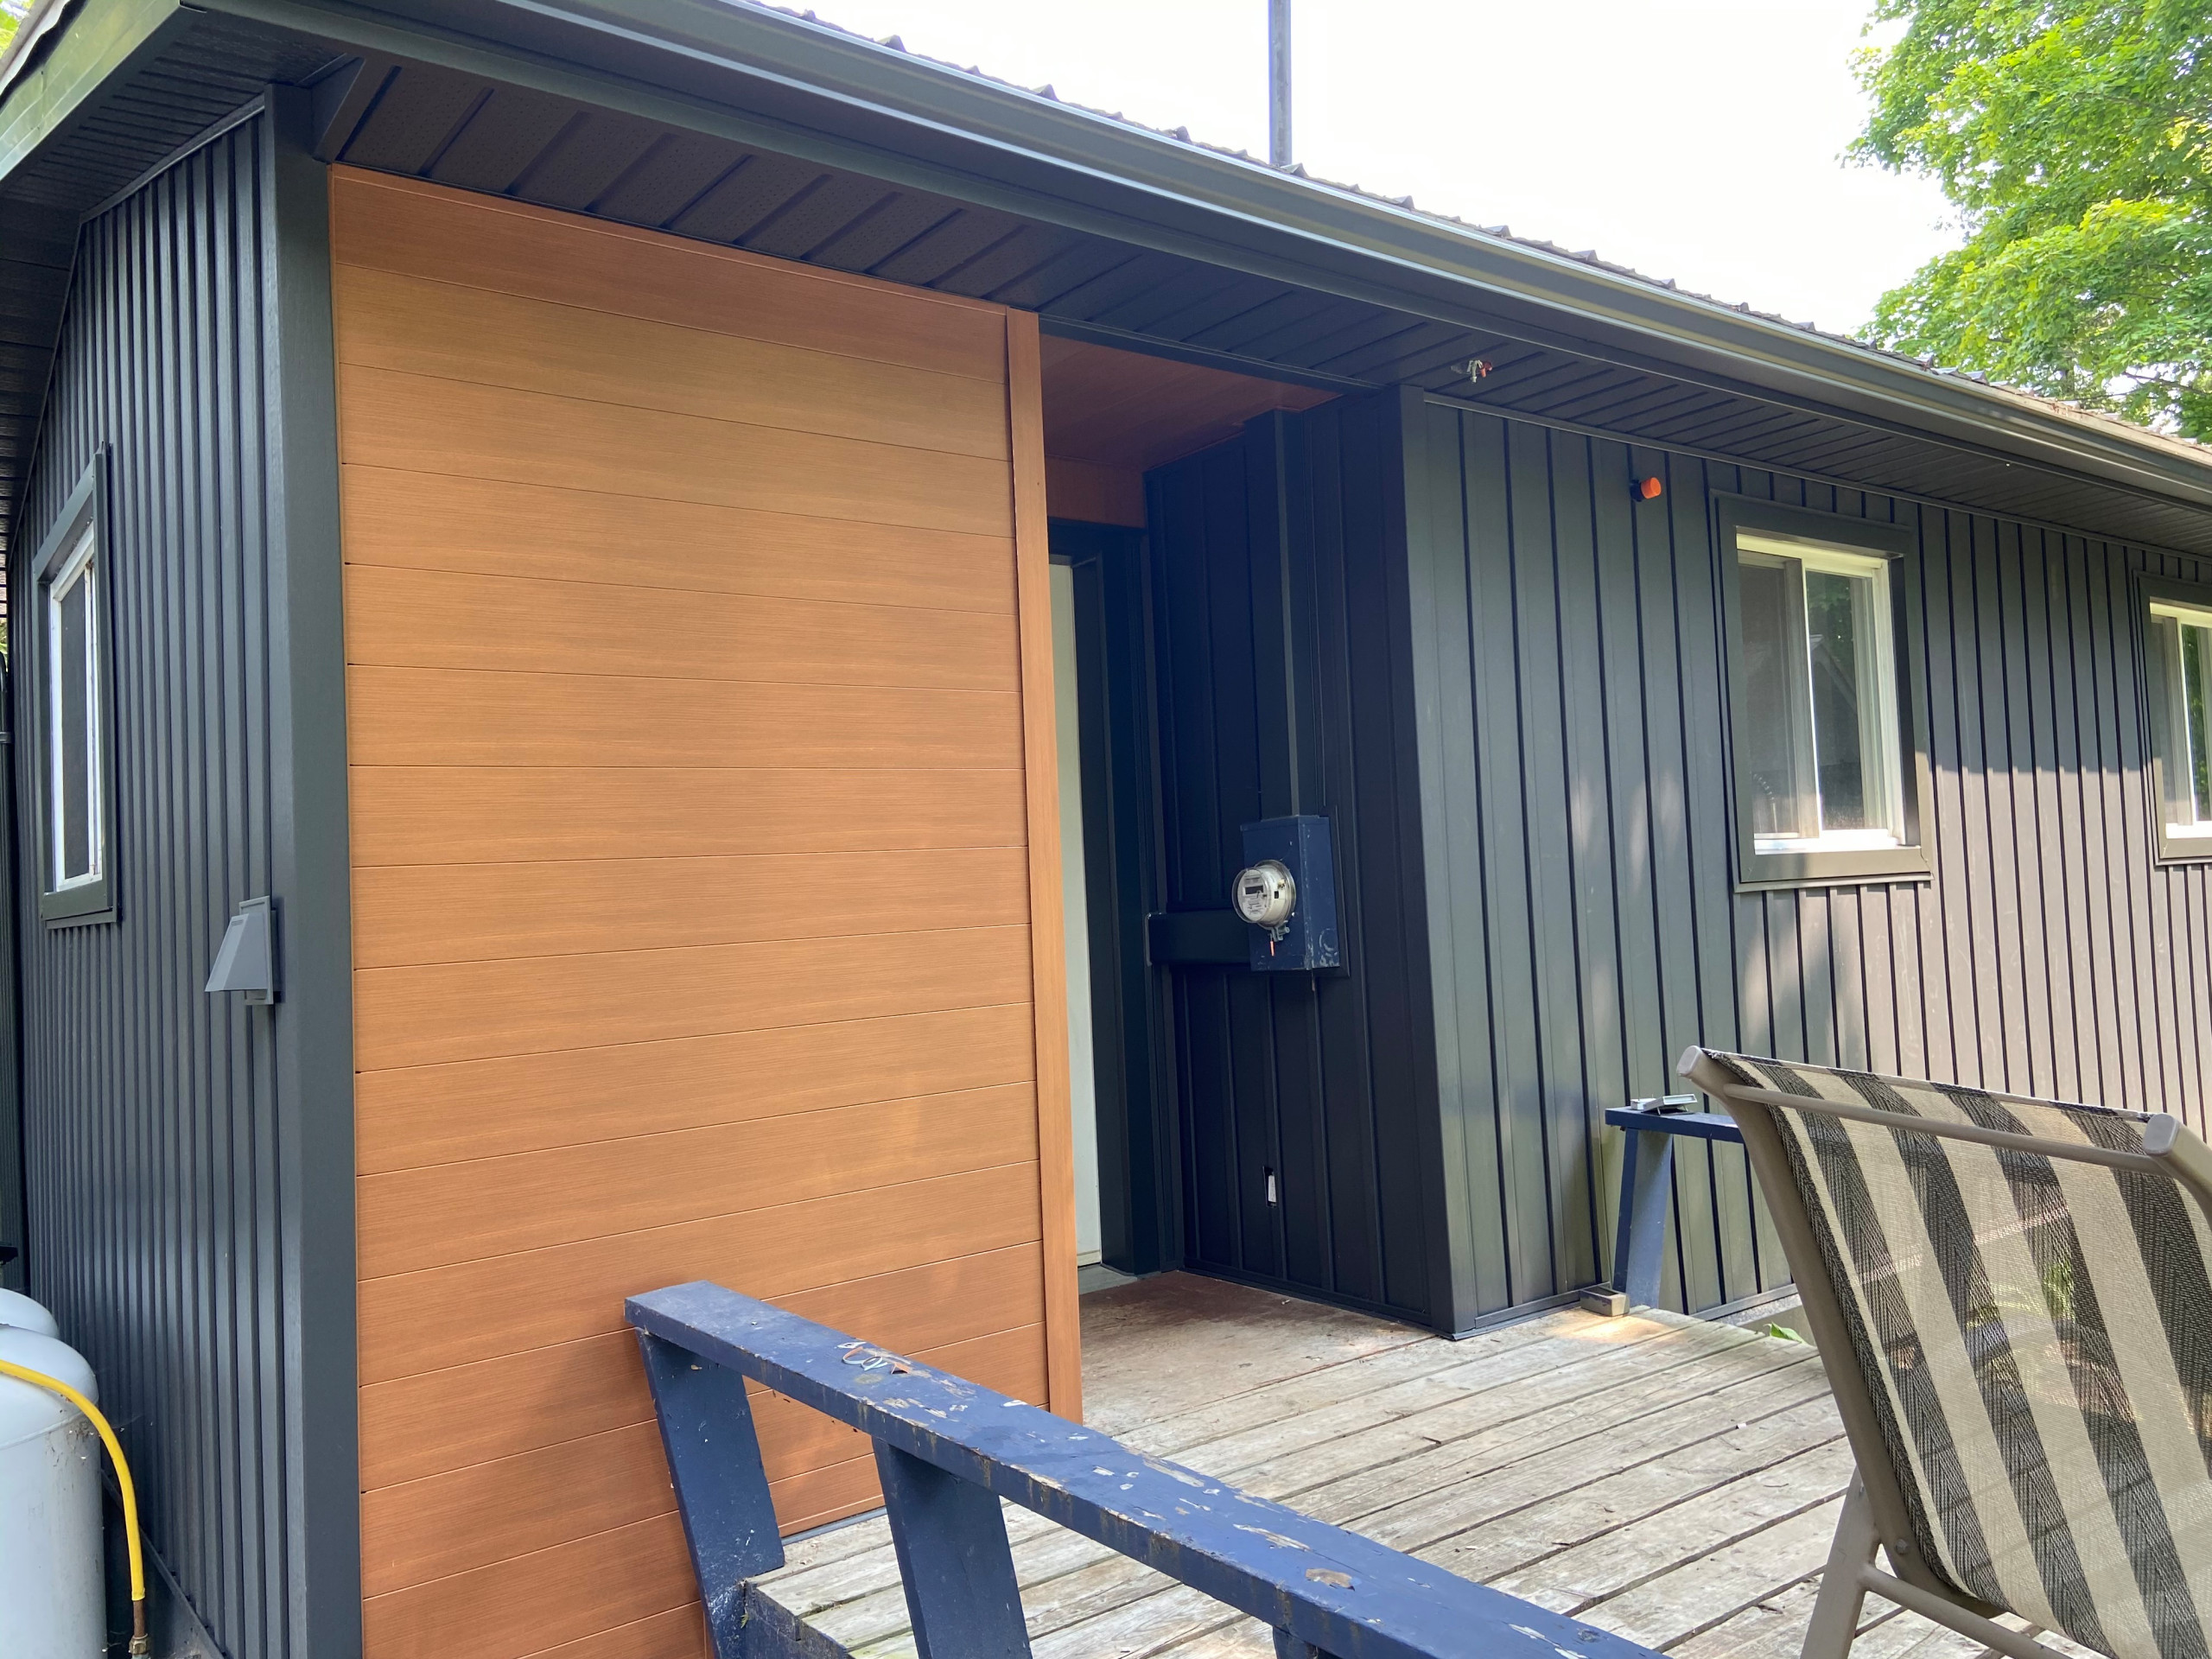 Utterson - Siding, soffit, fasacia and eavestrough